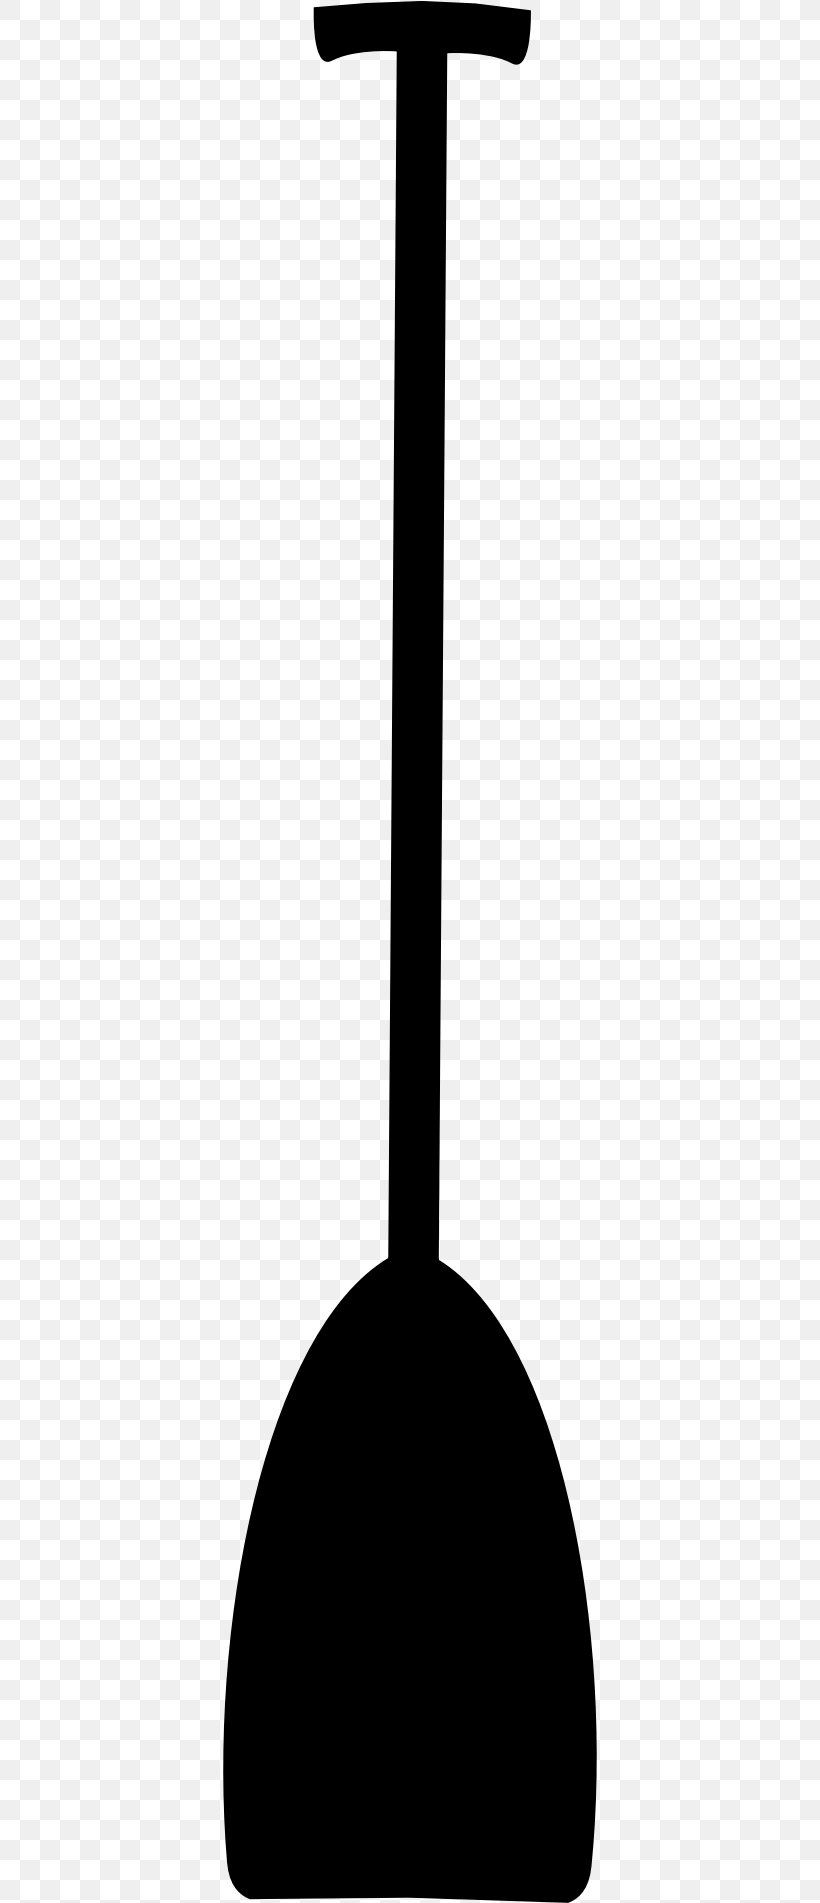 Paddle Canoe Oar Clip Art, PNG, 374x1903px, Paddle, Black, Black And White, Canoe, Canoe Paddle Strokes Download Free